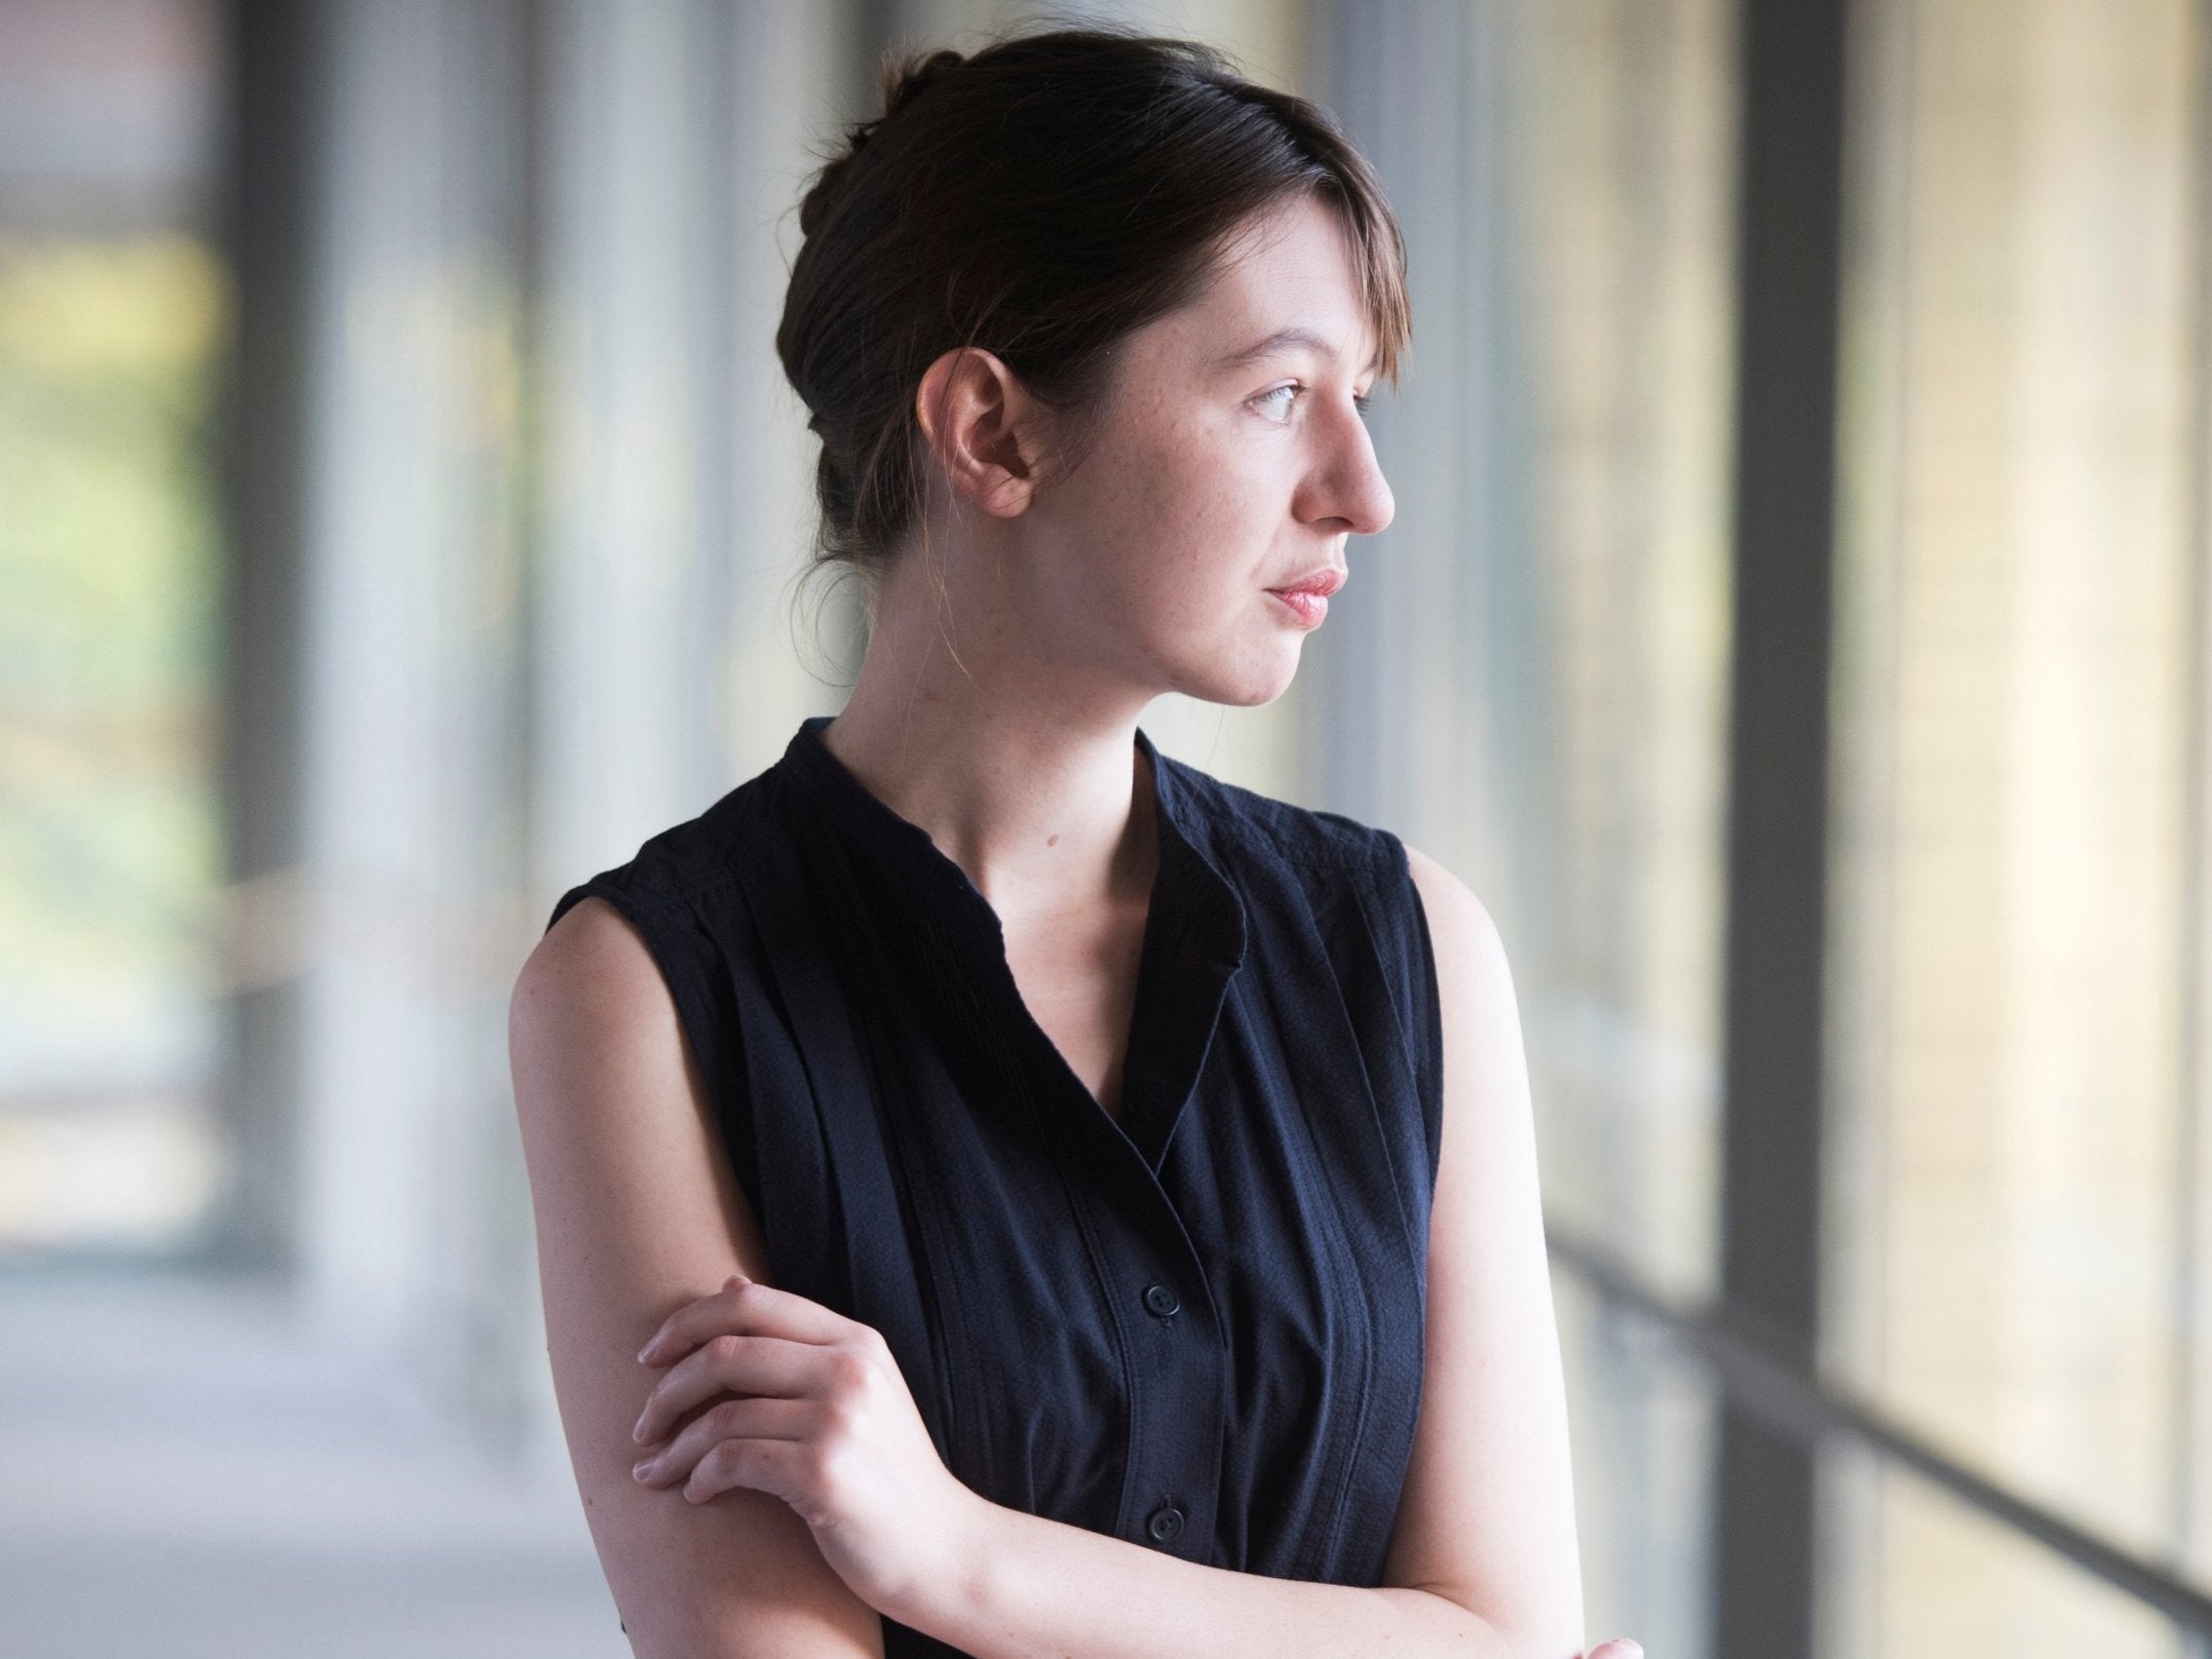 Sally Rooney’s ‘Normal People’ Wins Book of the Year at British Book